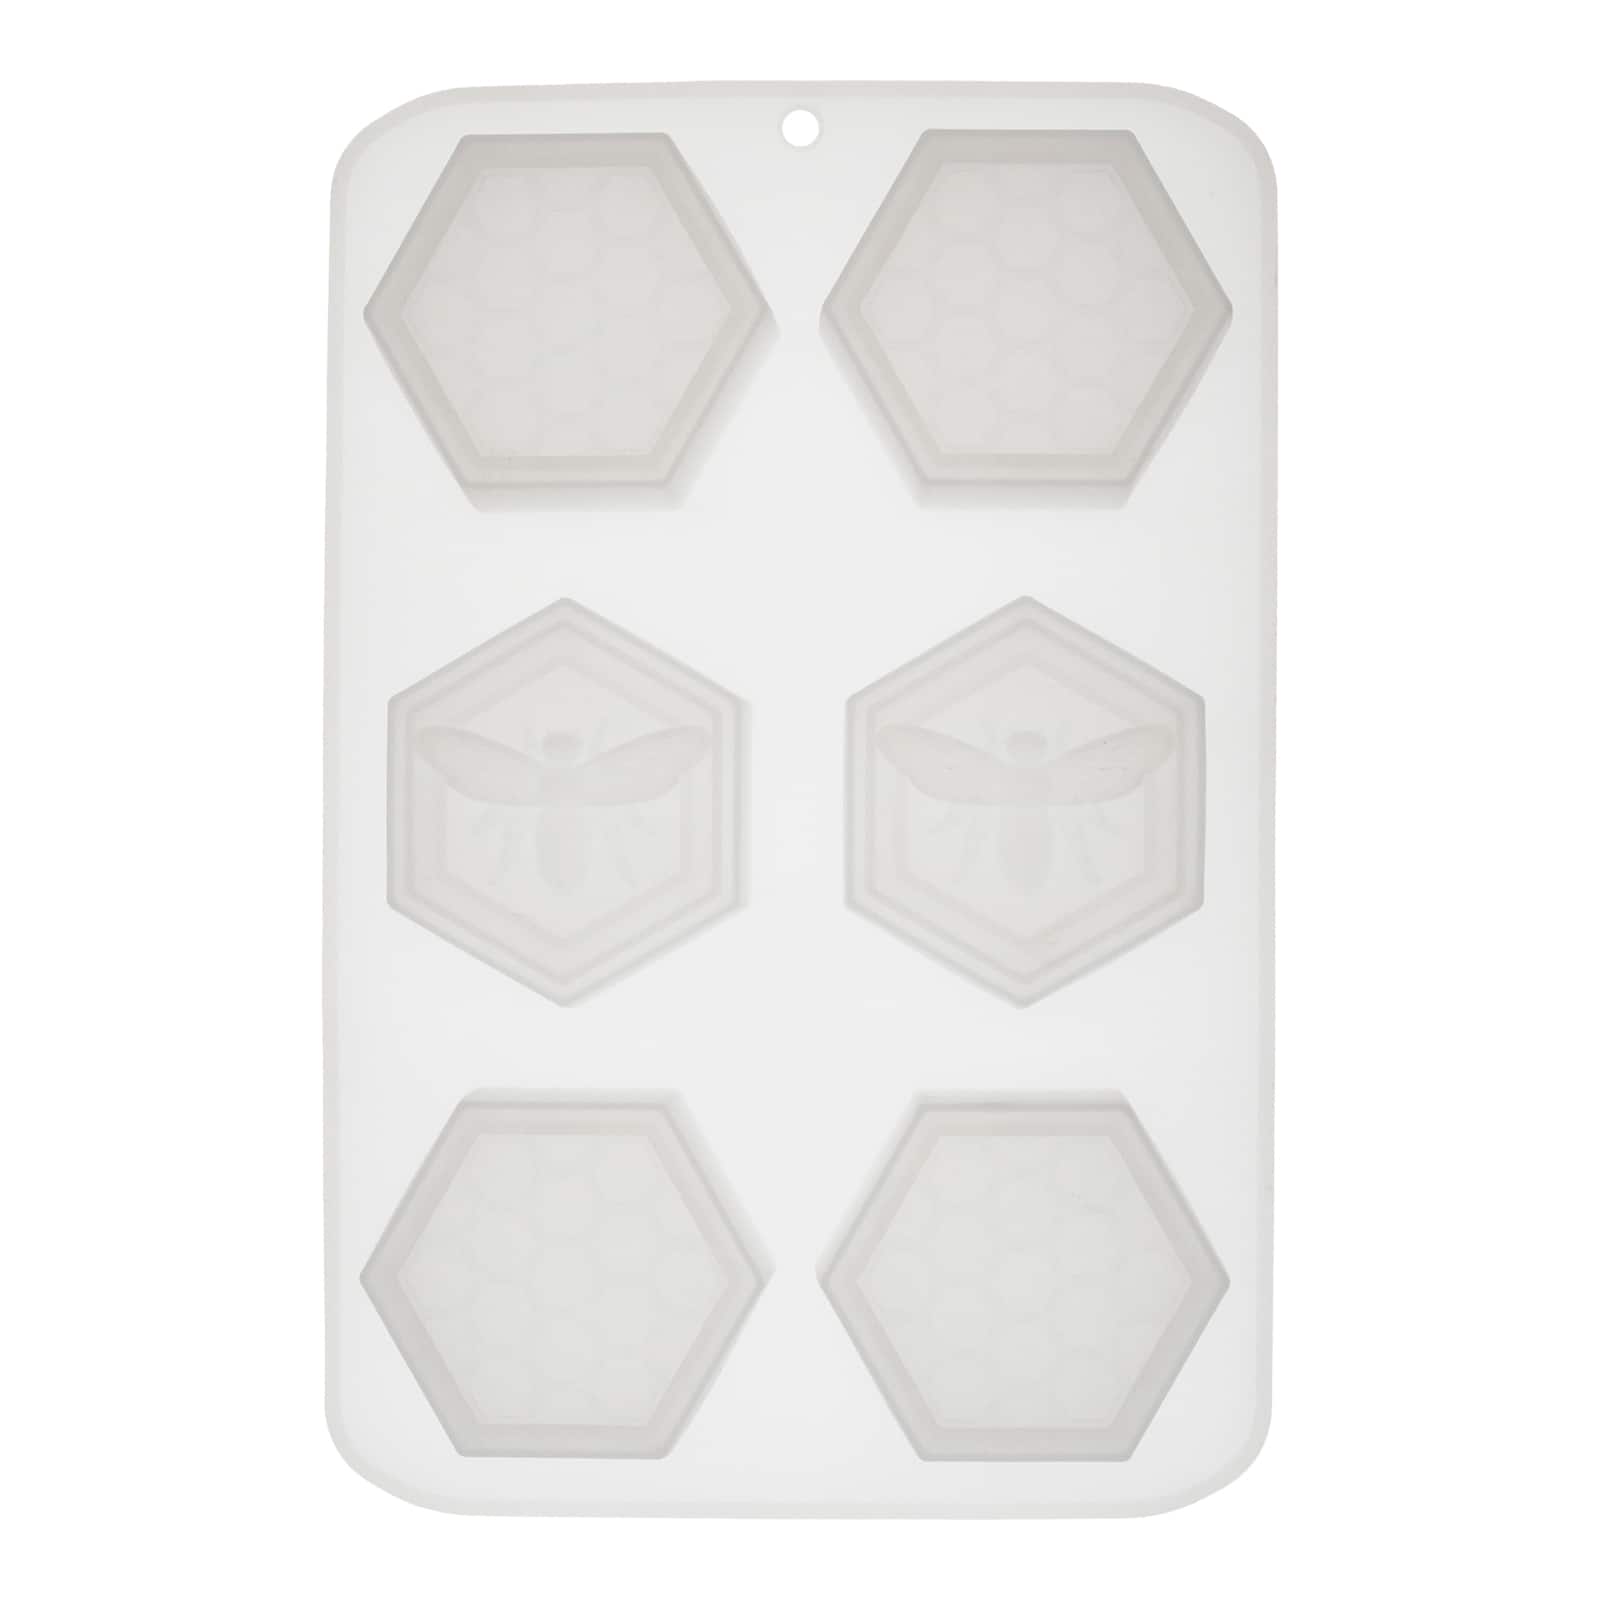 Silicone Honeycomb Soap Mold by Make Market | Michaels